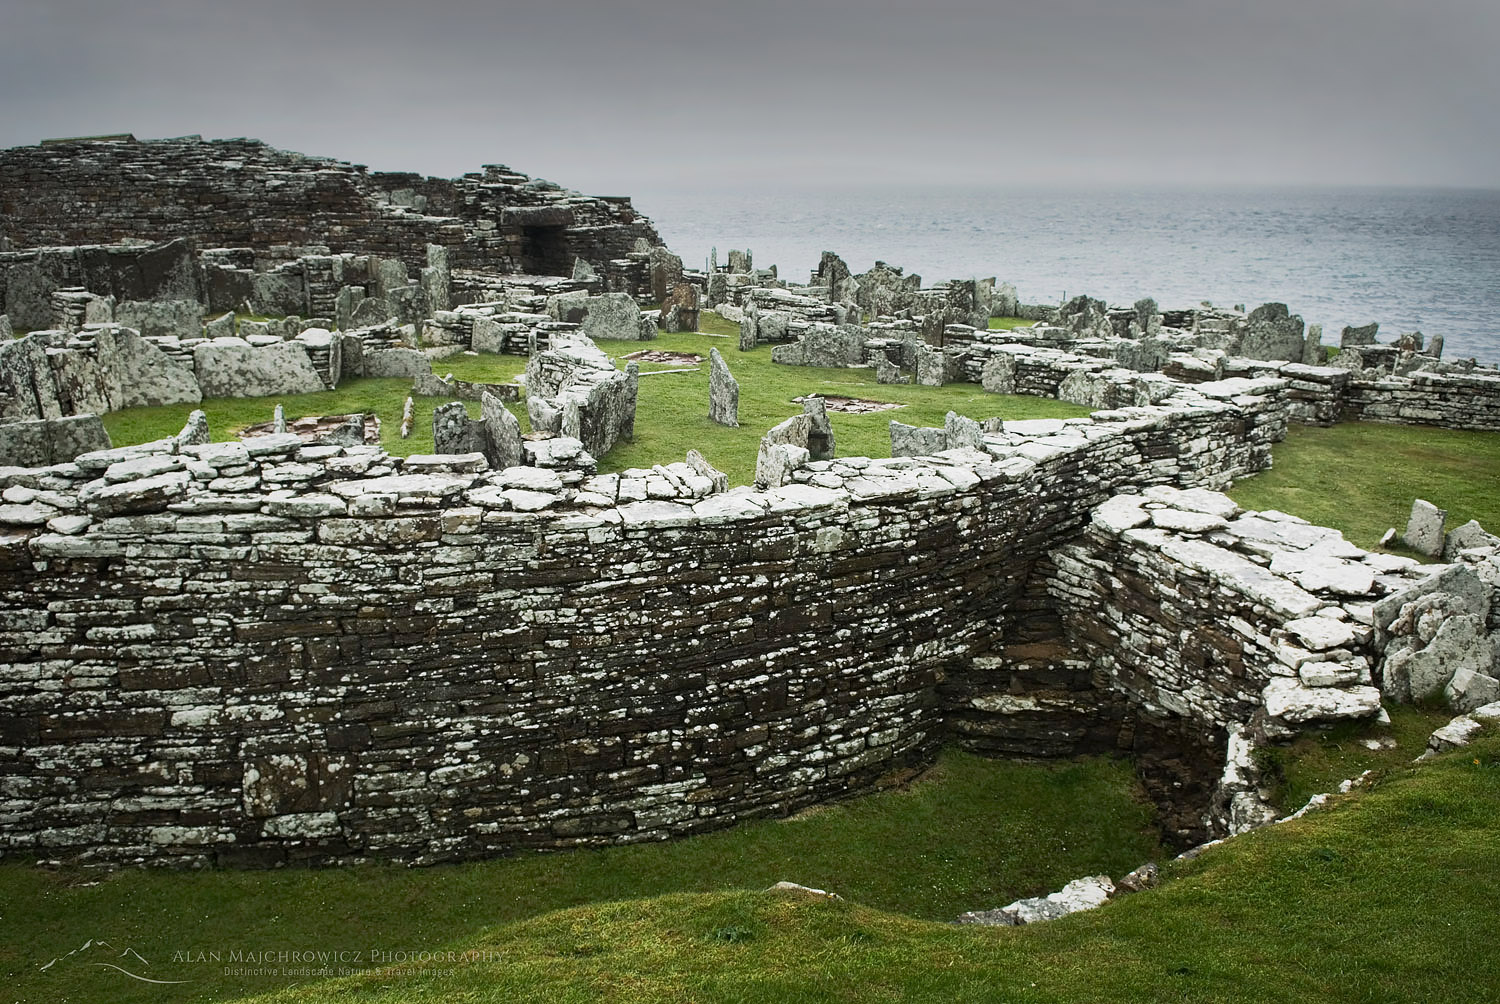 Broch of Gurness, a fortified dwelling dating back to the Iron Age around 2000 BC, Orkney Islands Scotland #12263r